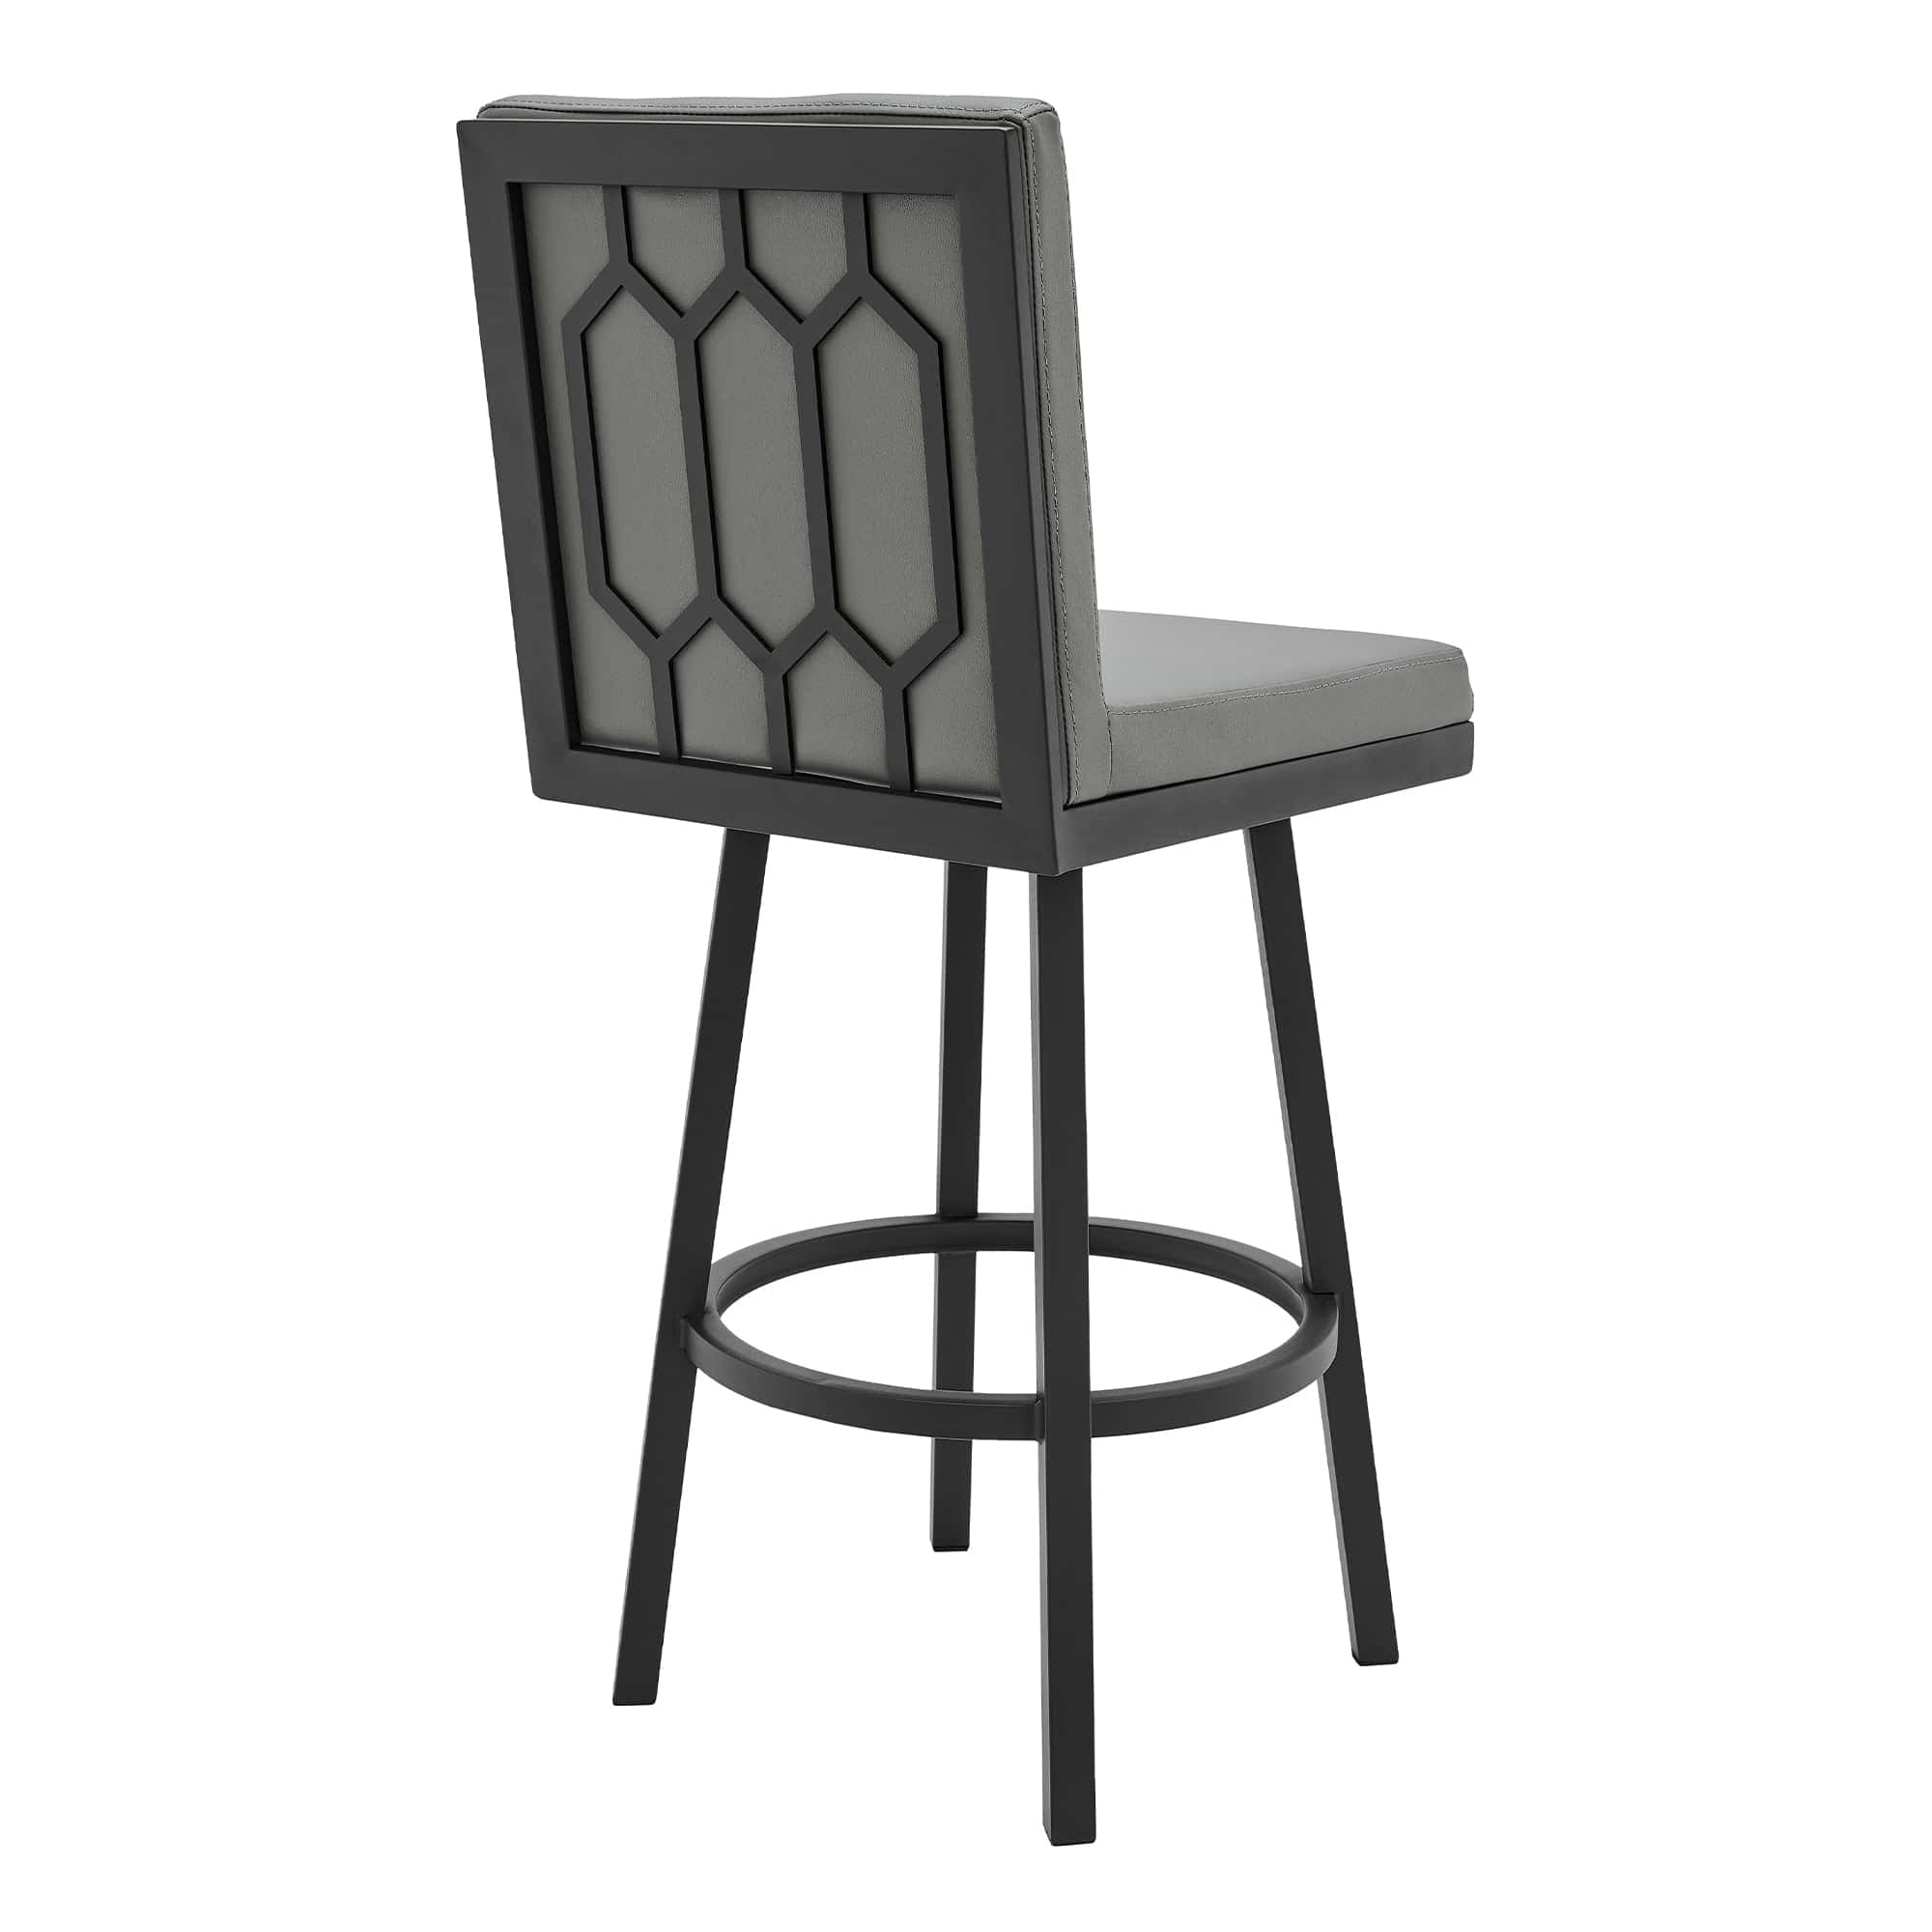 Armen Living Barstool Armen Living - Rochester Swivel Modern Metal and Gray Faux Leather Bar and Counter Stool | 721535752171